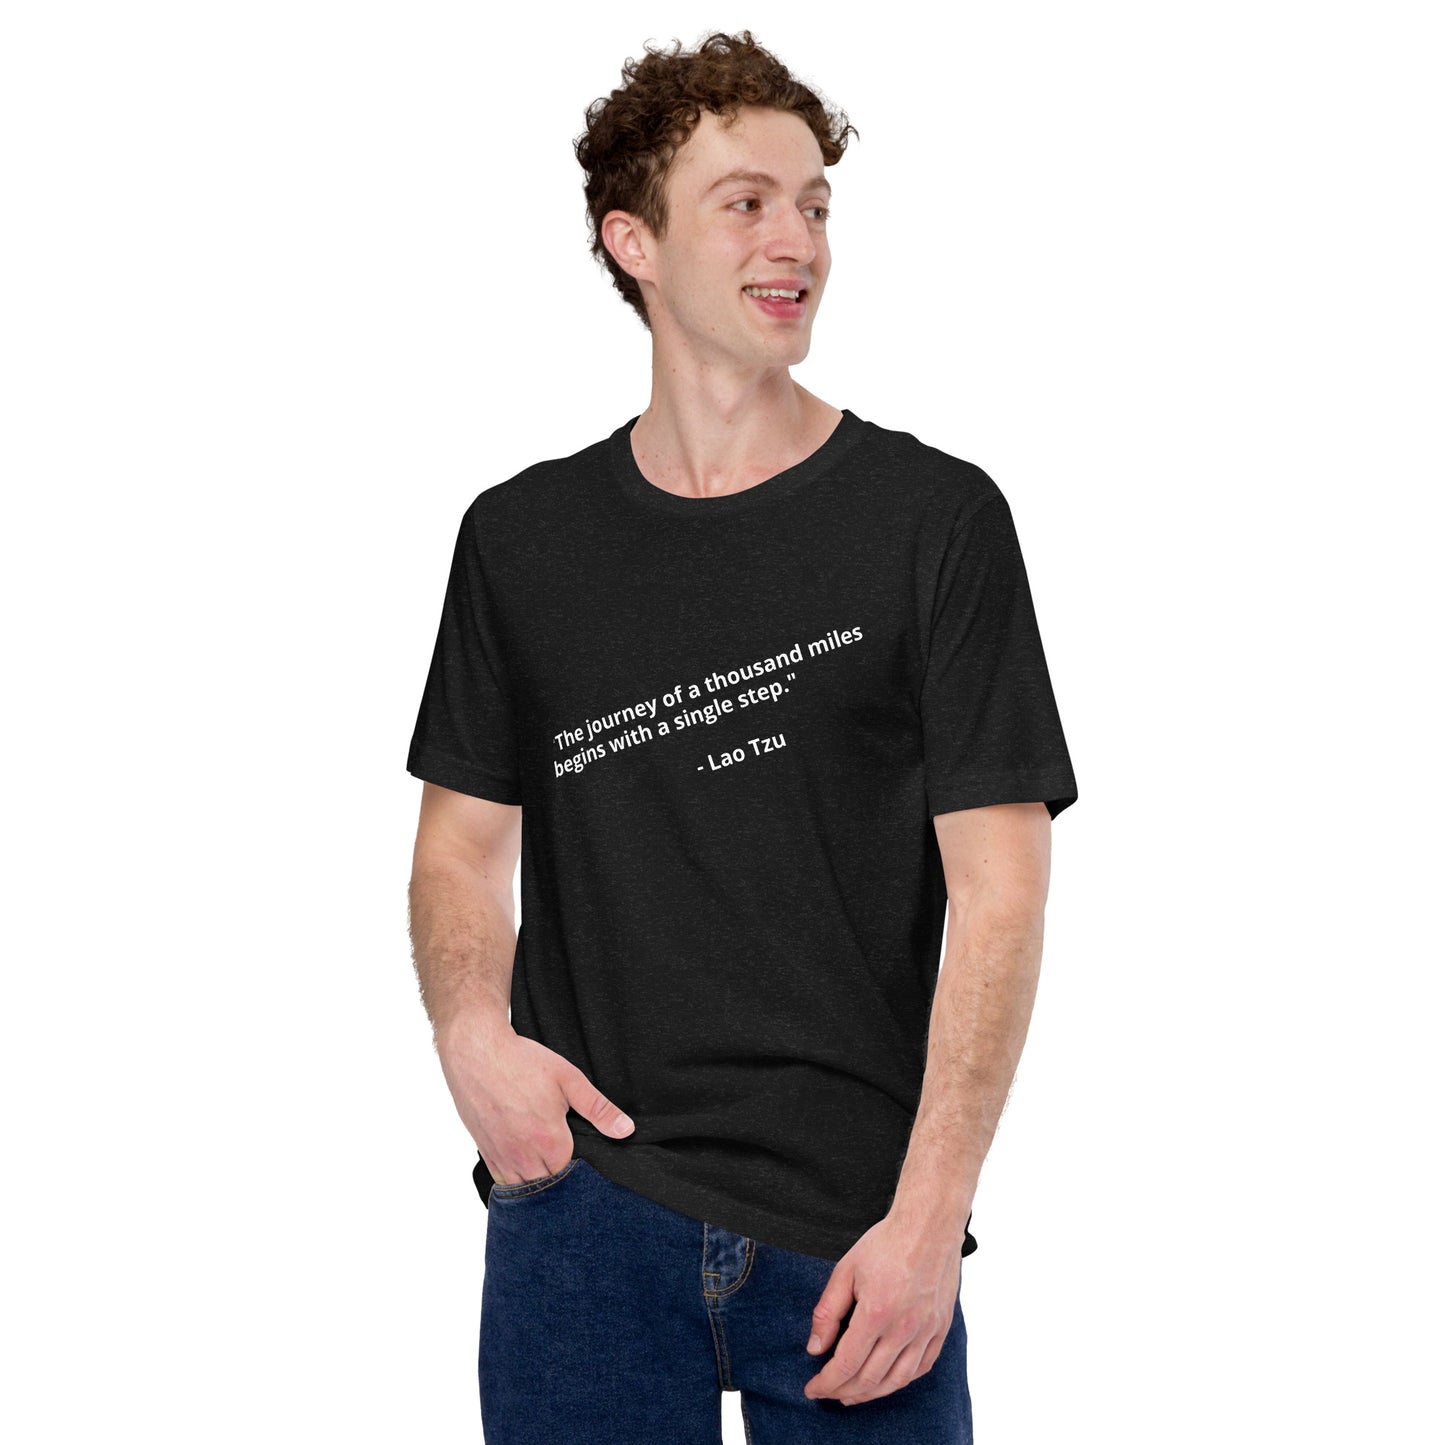 "The journey of a thousand miles begins with a single step." - Lao Tzu- Unisex t-shirt